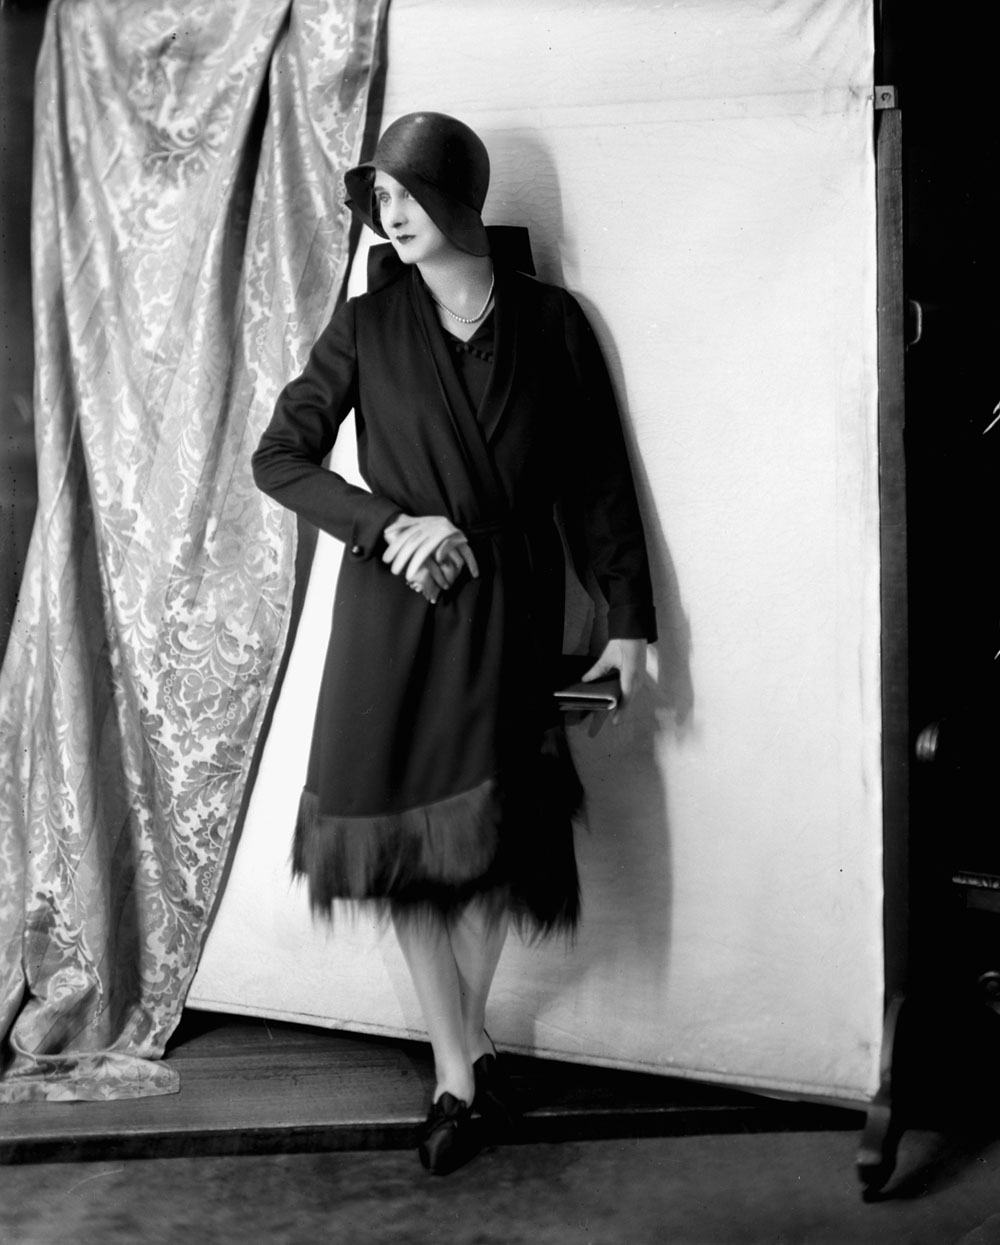 A model wears a knee-length dress and overcoat with a women's bowler hat.